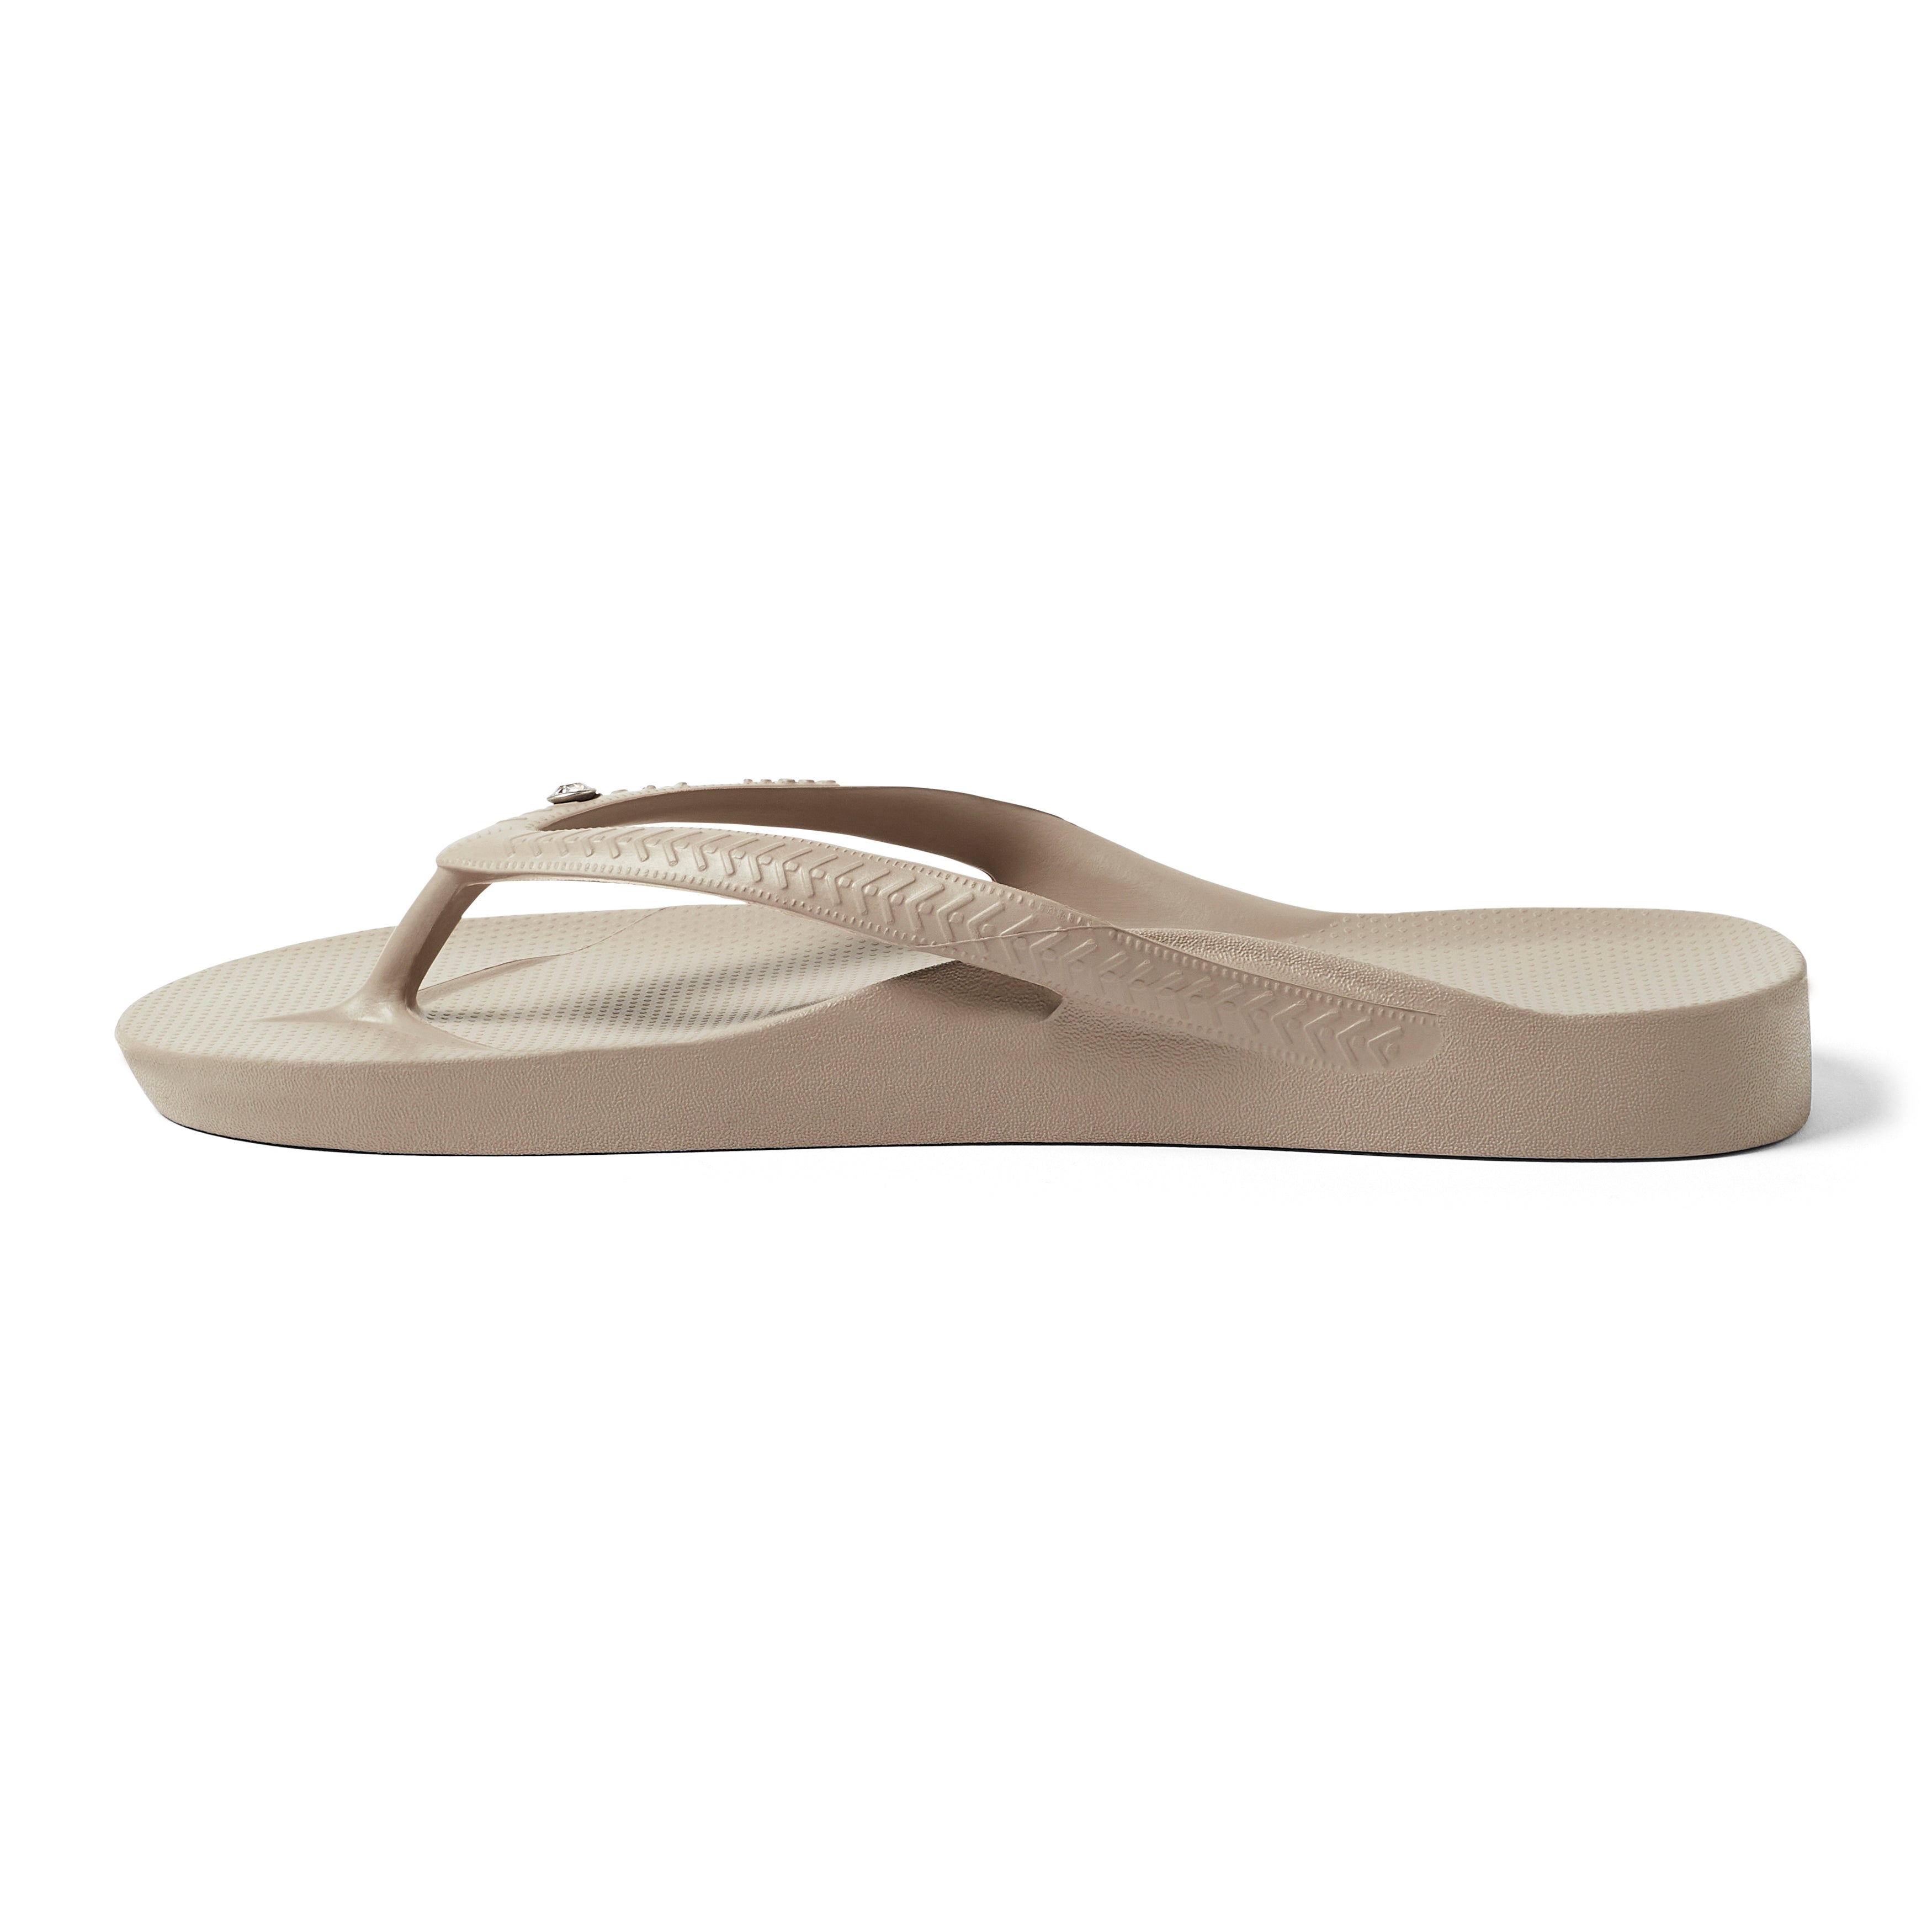 ARCHIES FOOTWEAR JANDALS - TAUPE-CRYSTAL – CRAZE FASHION NZ